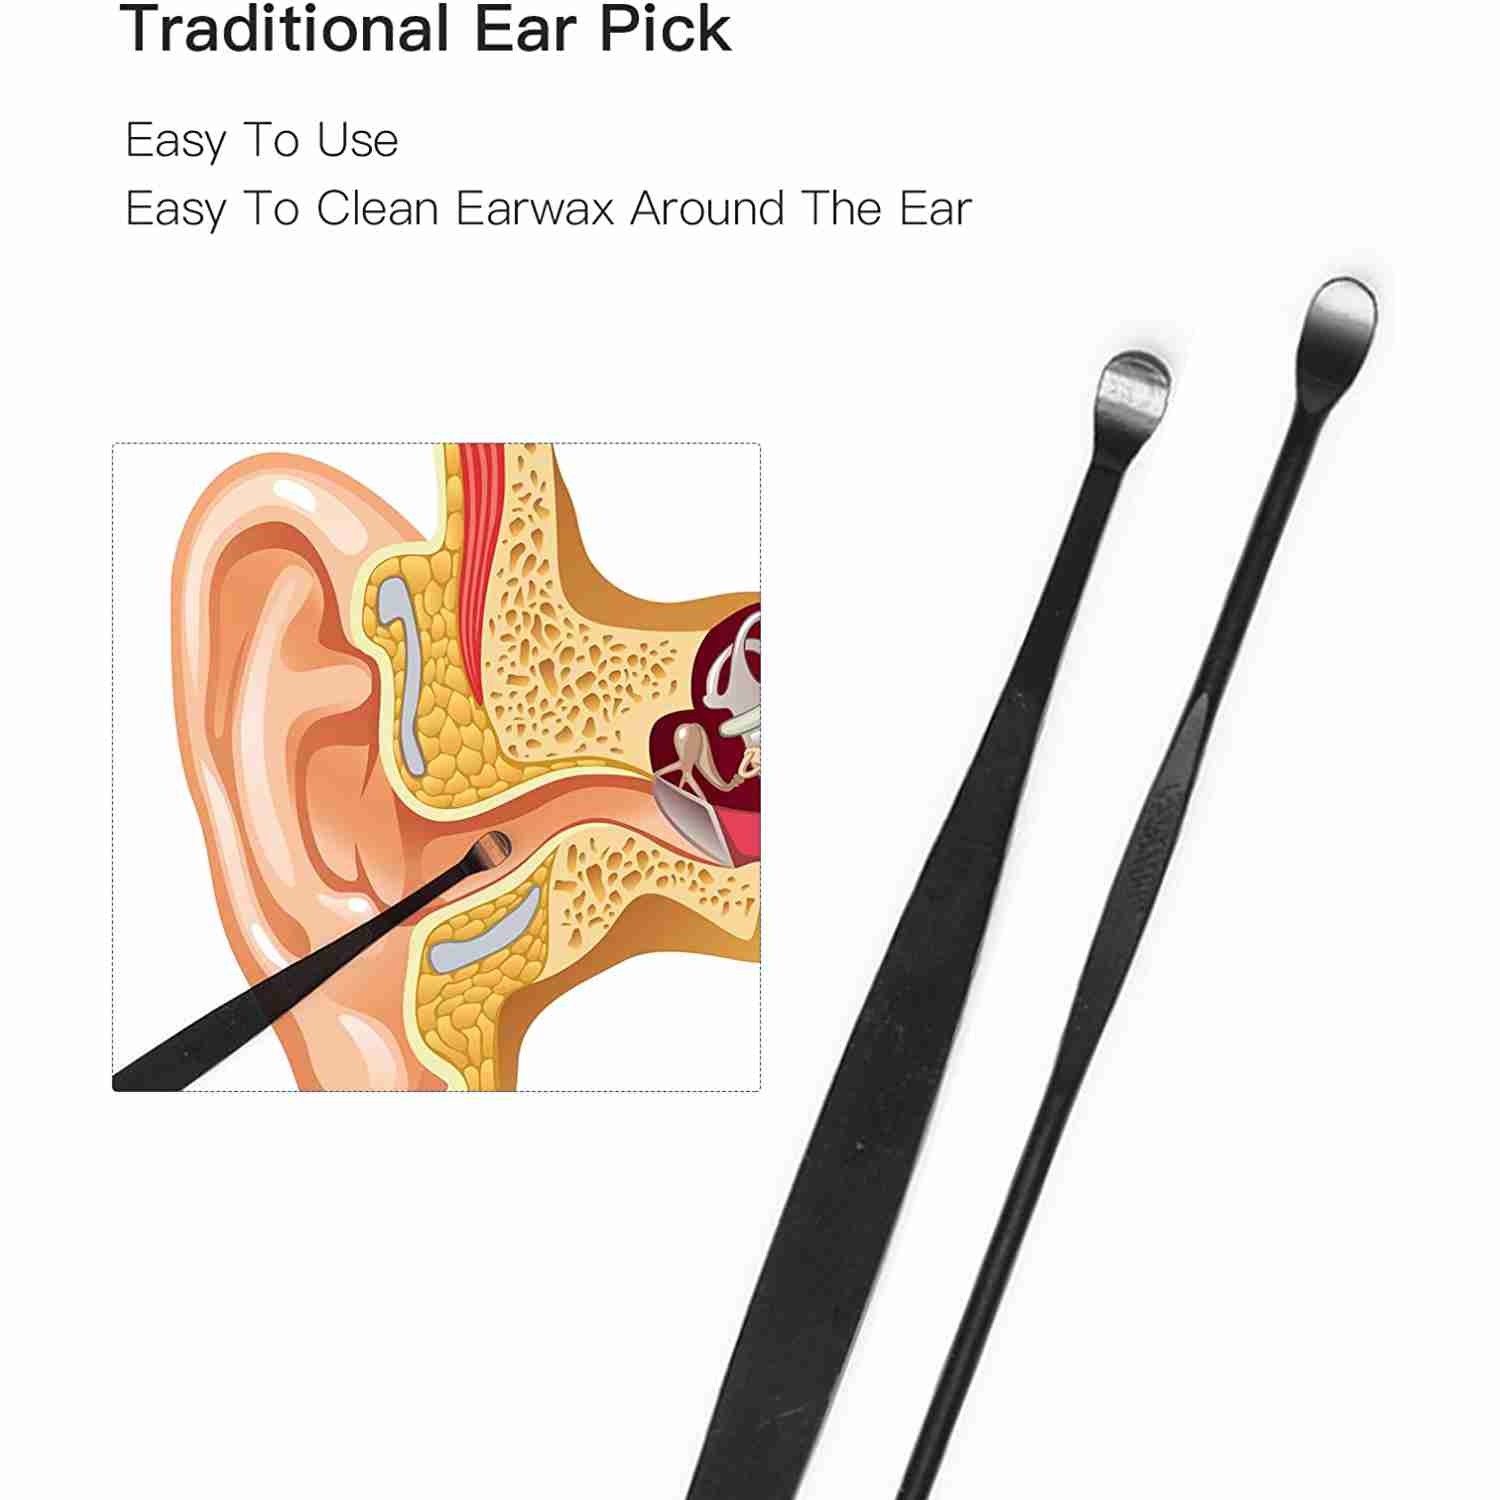 ear-cleaning-kitear-wax-removal-kitearwax-removal-kit with discount code